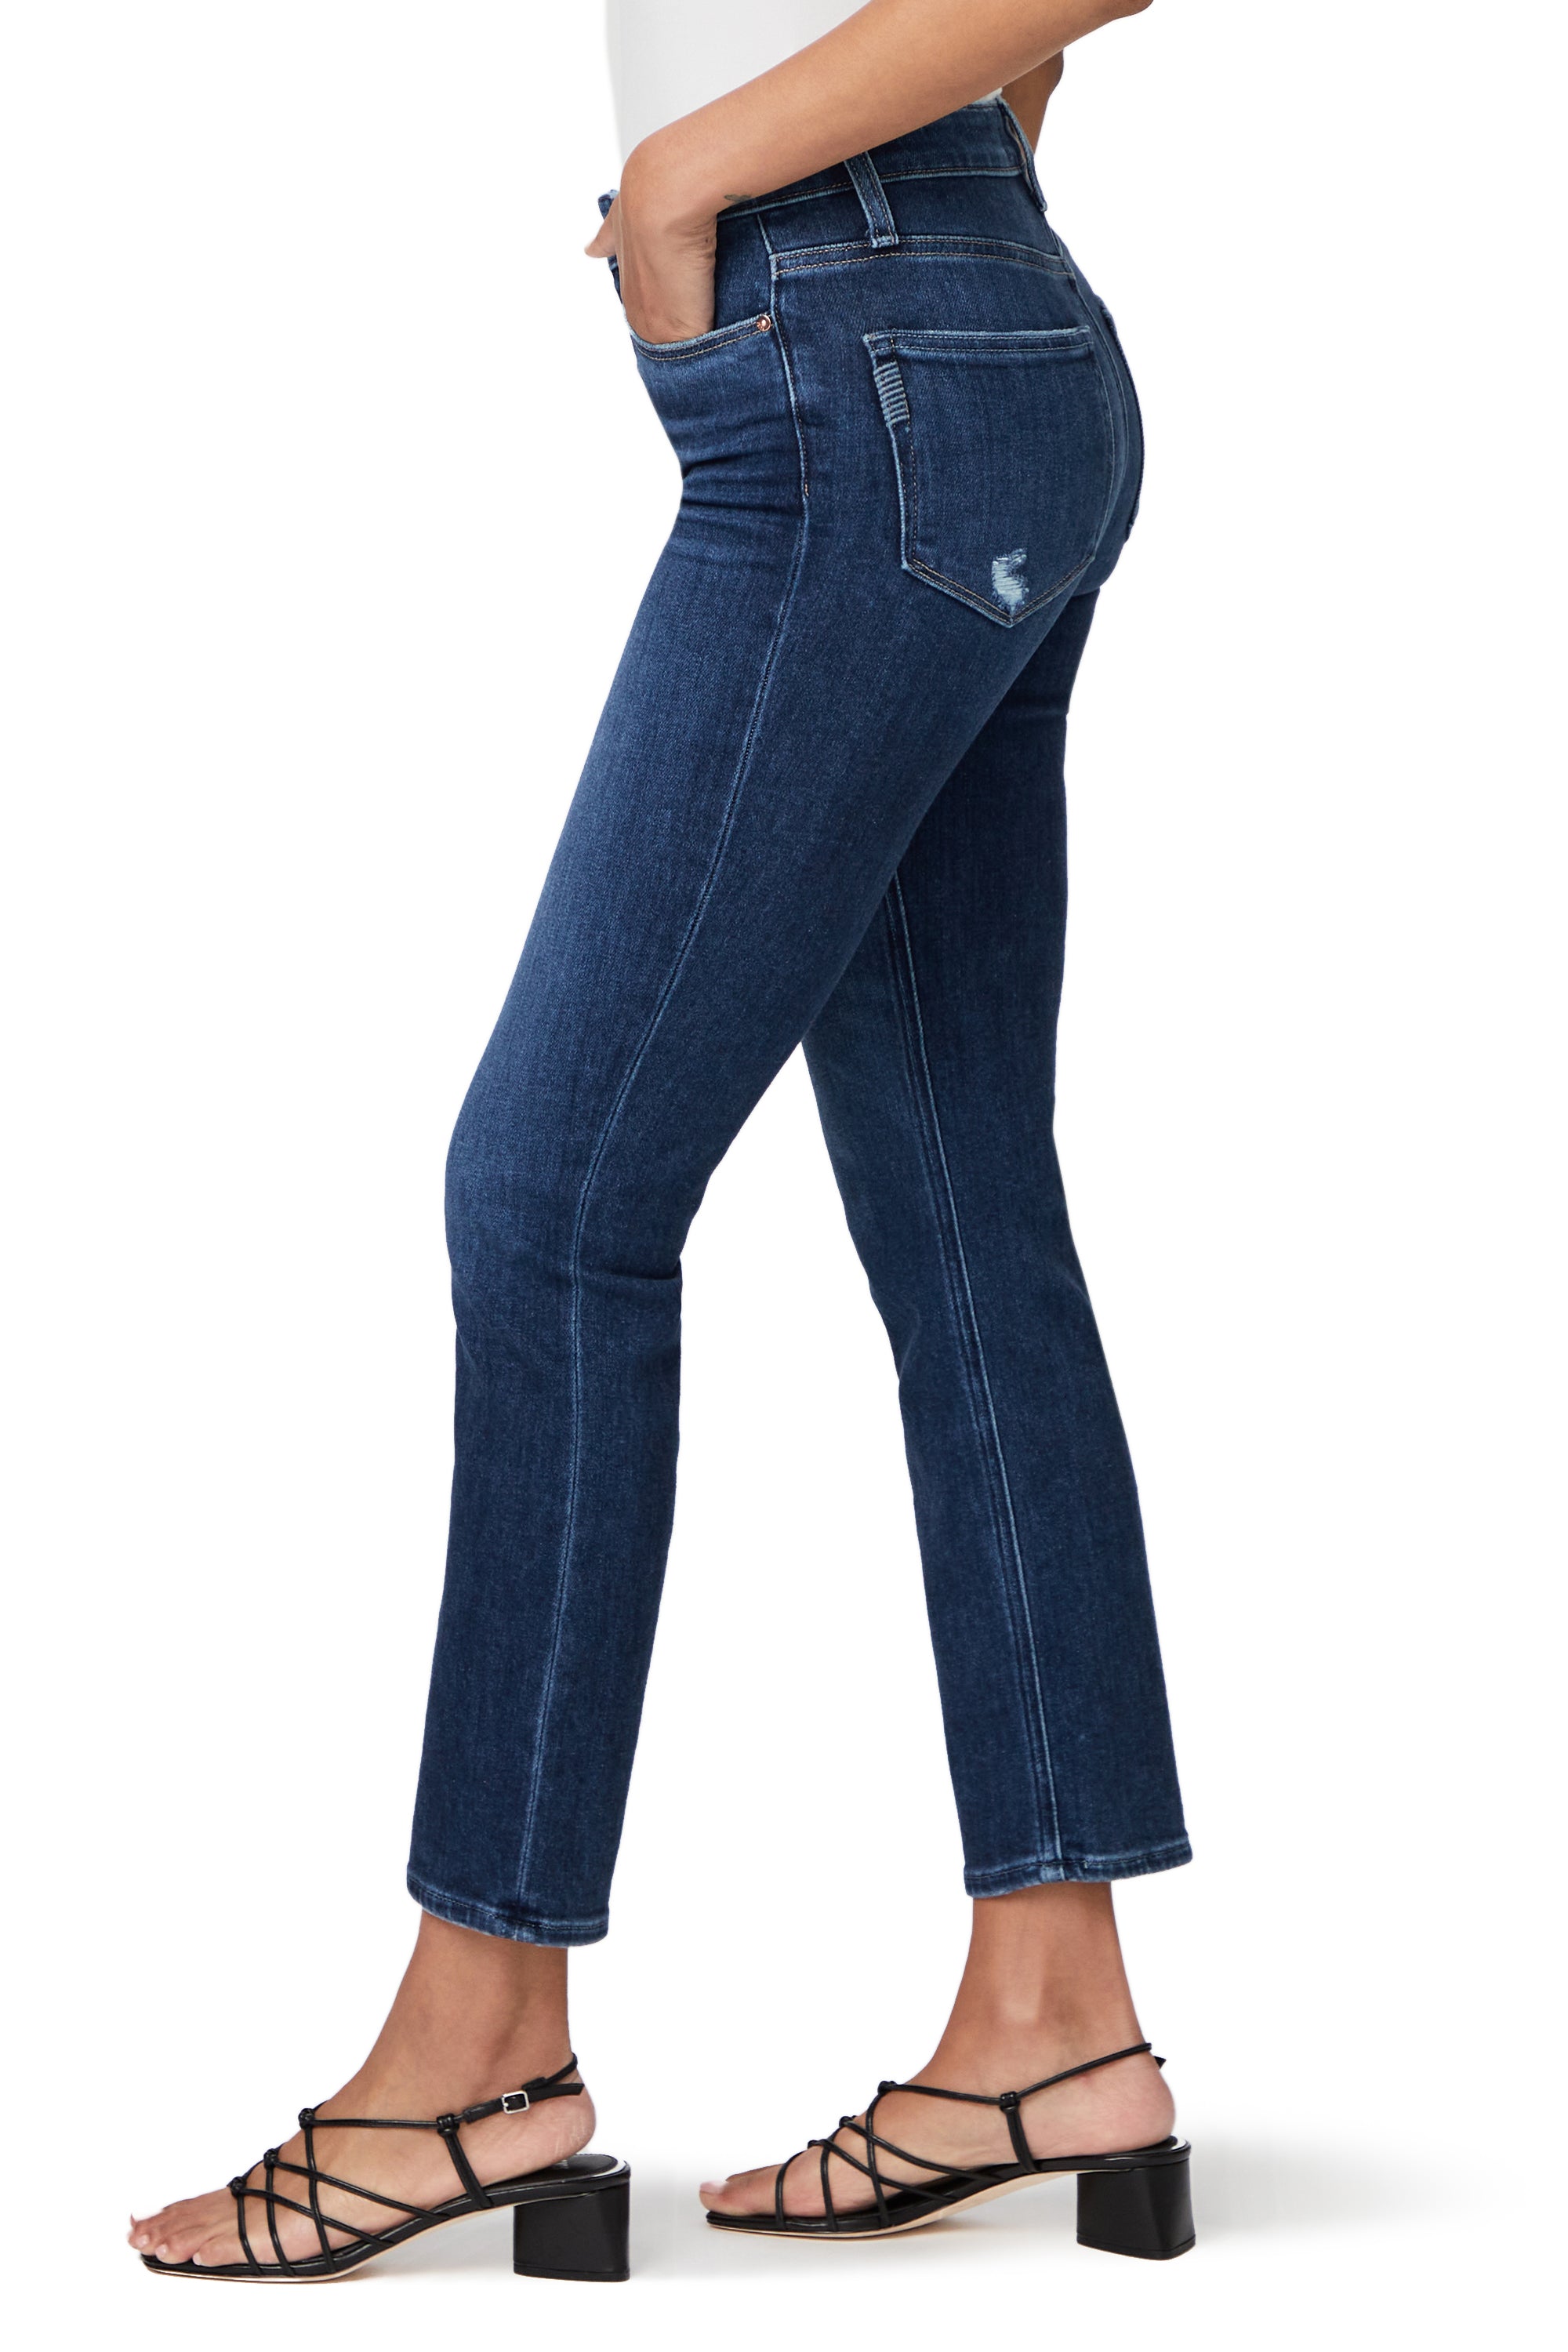 The back view of a woman wearing Paige high rise vintage denim jeans in a medium blue wash, the Cindy Straight Ankle - Emotion Distressed.